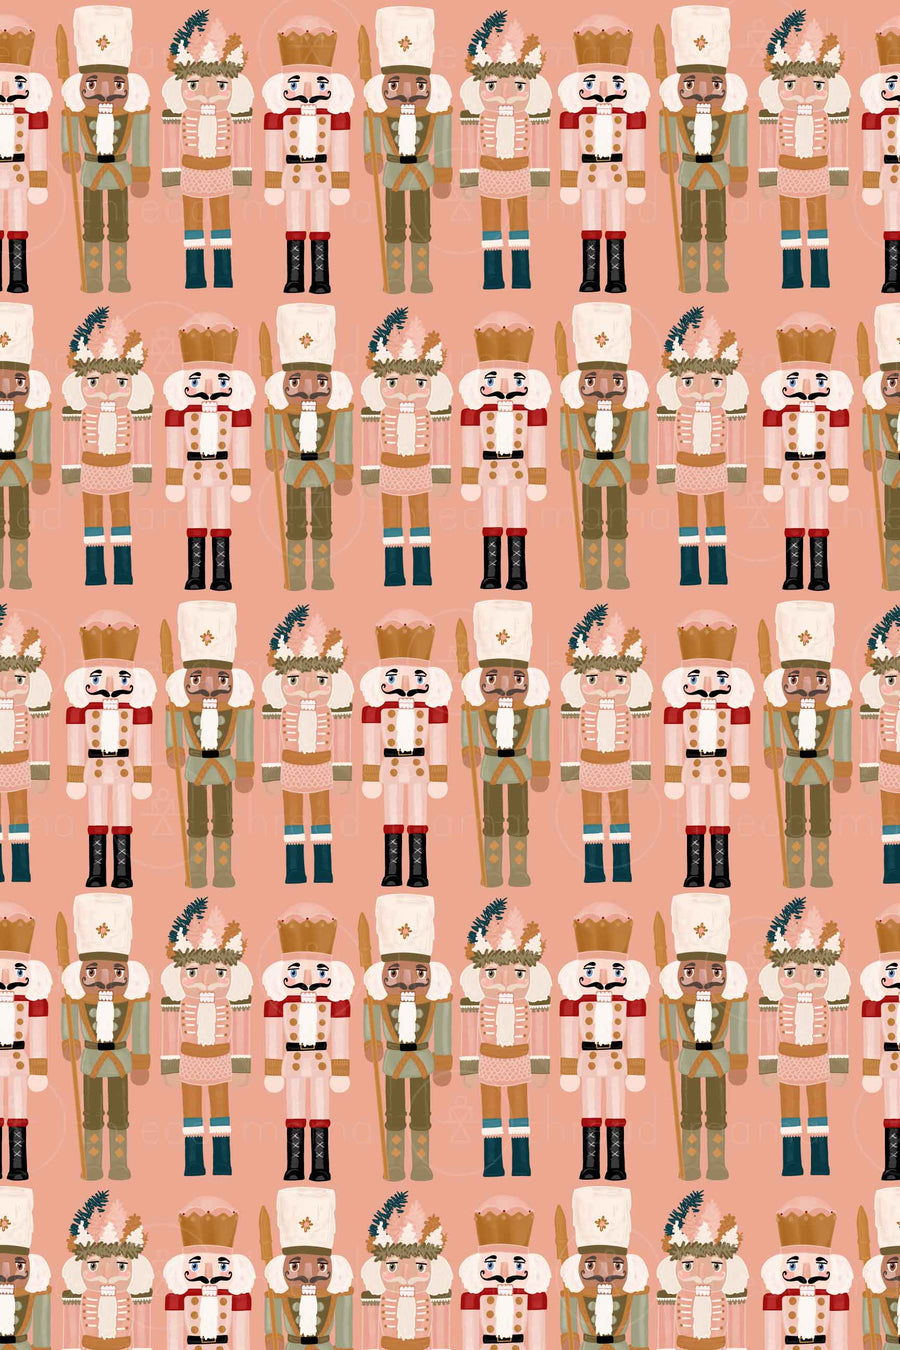 Background Pattern #25 (Printable Poster)